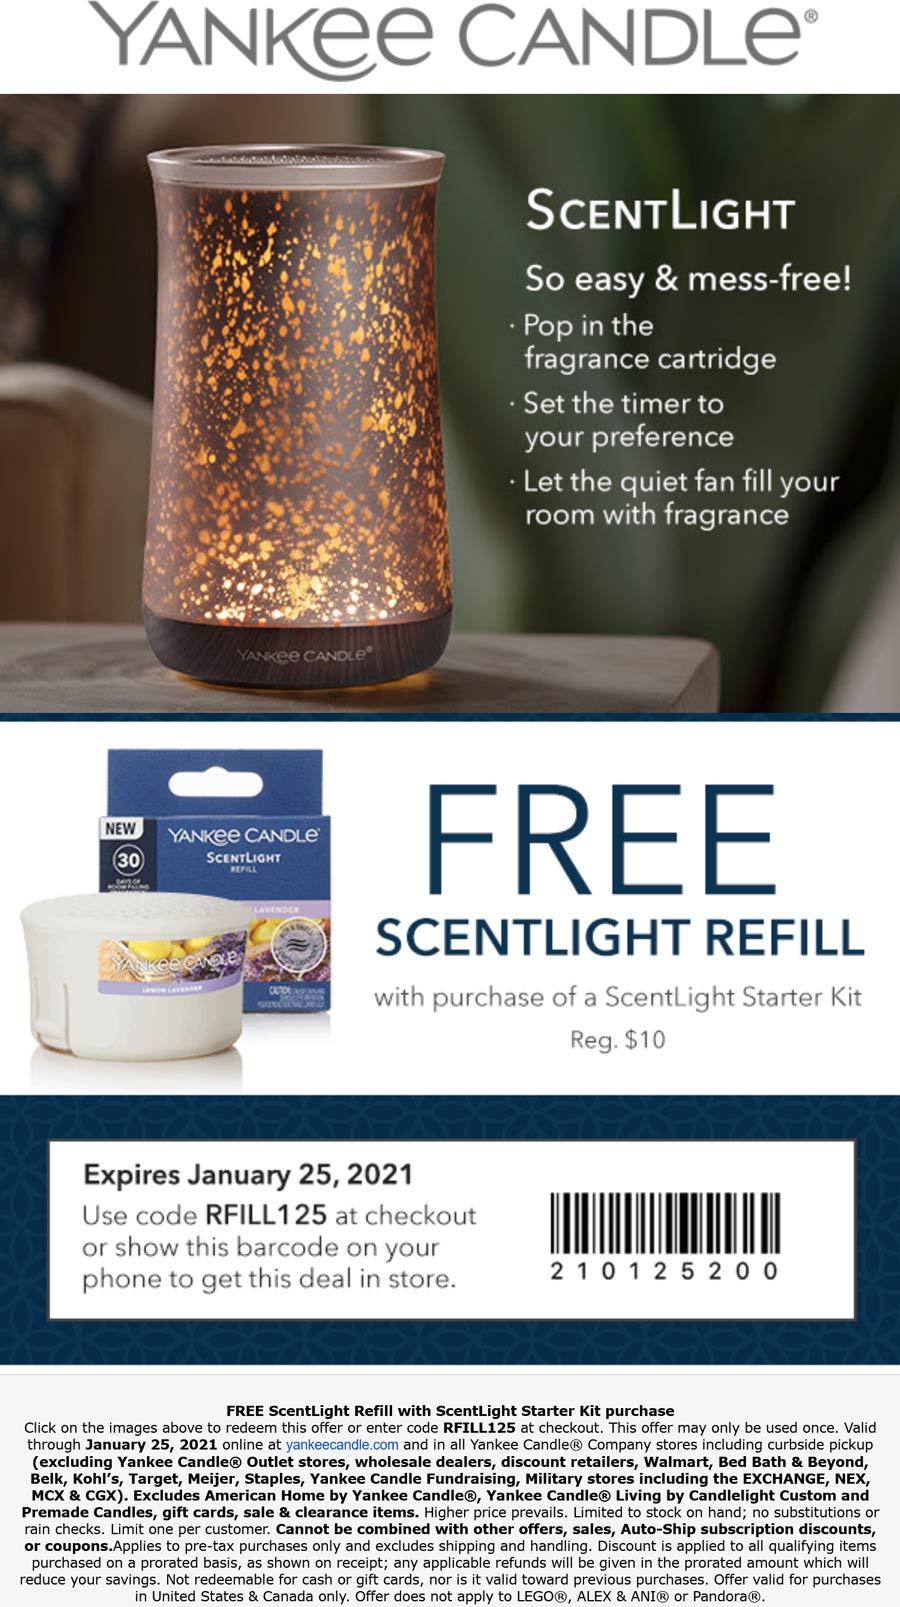 Yankee Candle stores Coupon  Free refill with your cordless scentlight today at Yankee Candle, or online via promo code RFILL125 #yankeecandle 